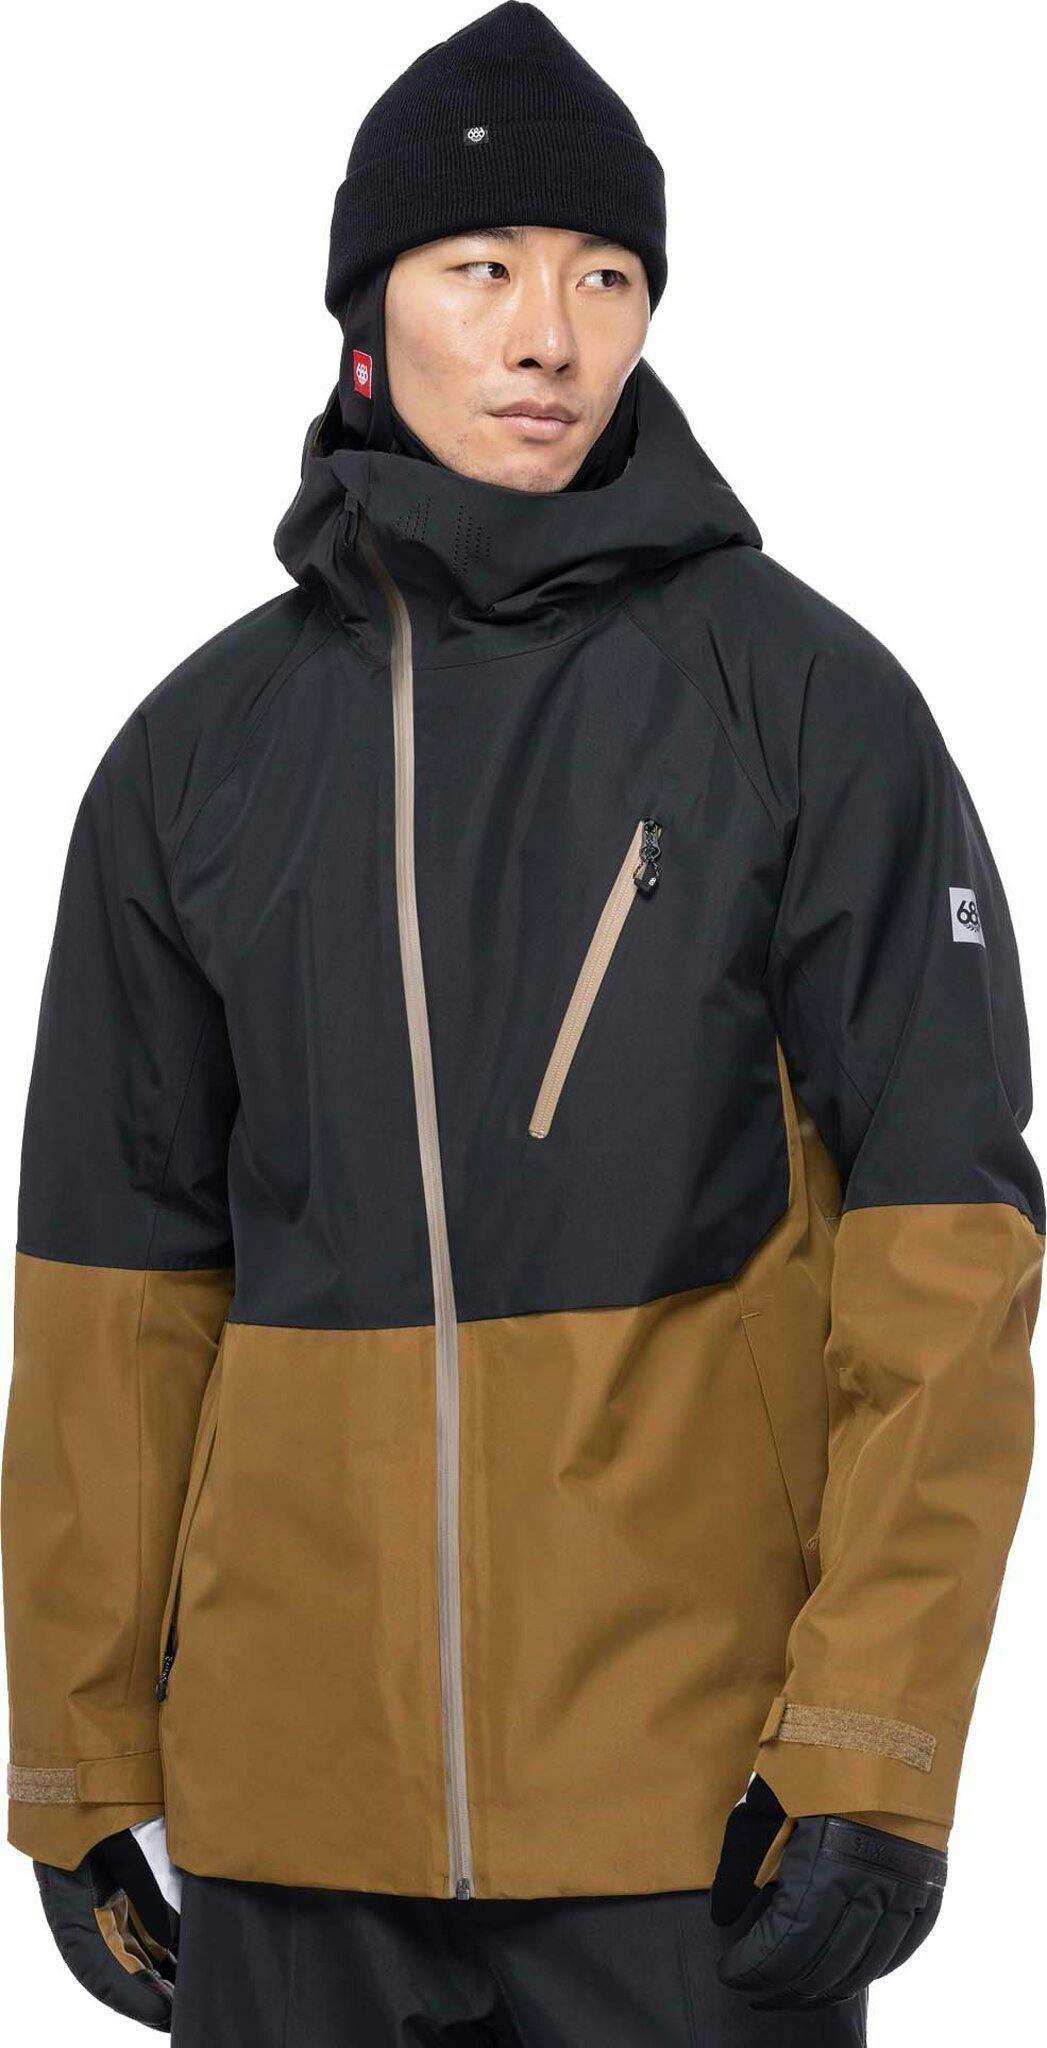 Product image for Hydra Thermagraph Jacket - Men’s